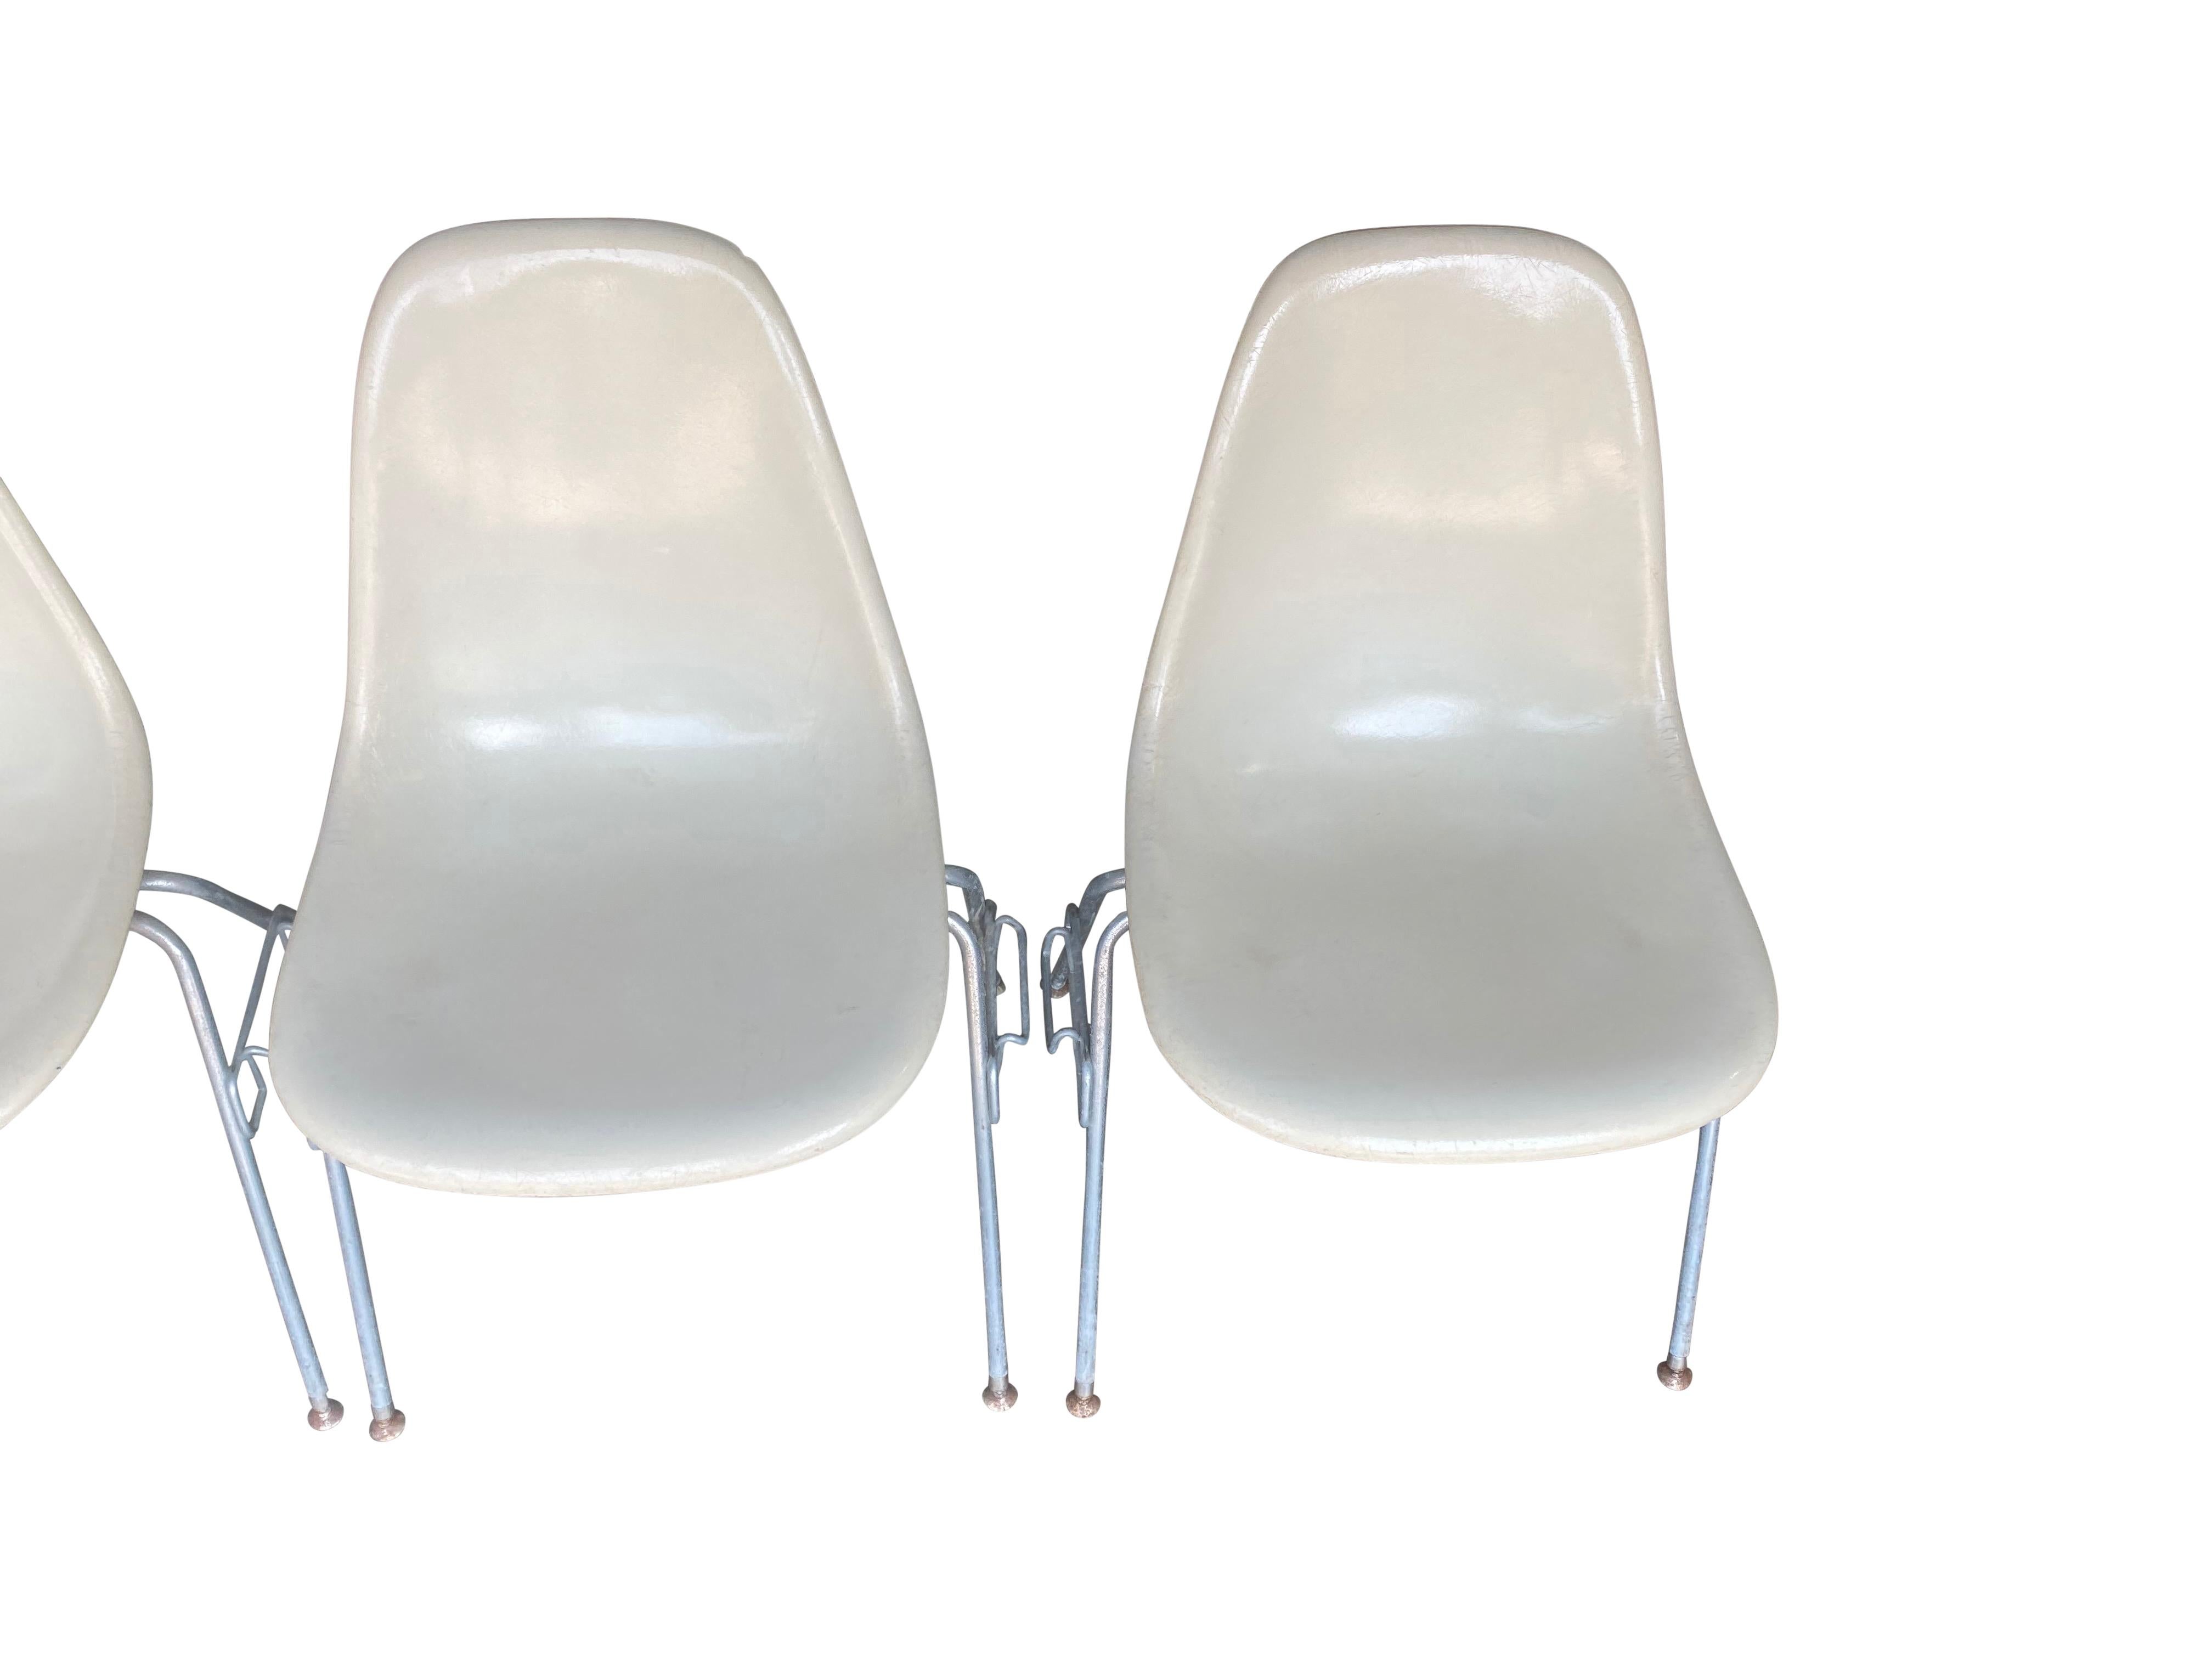 Four Herman Miller Eames Fiberglass Stacking Dining Chairs In Fair Condition For Sale In Brooklyn, NY